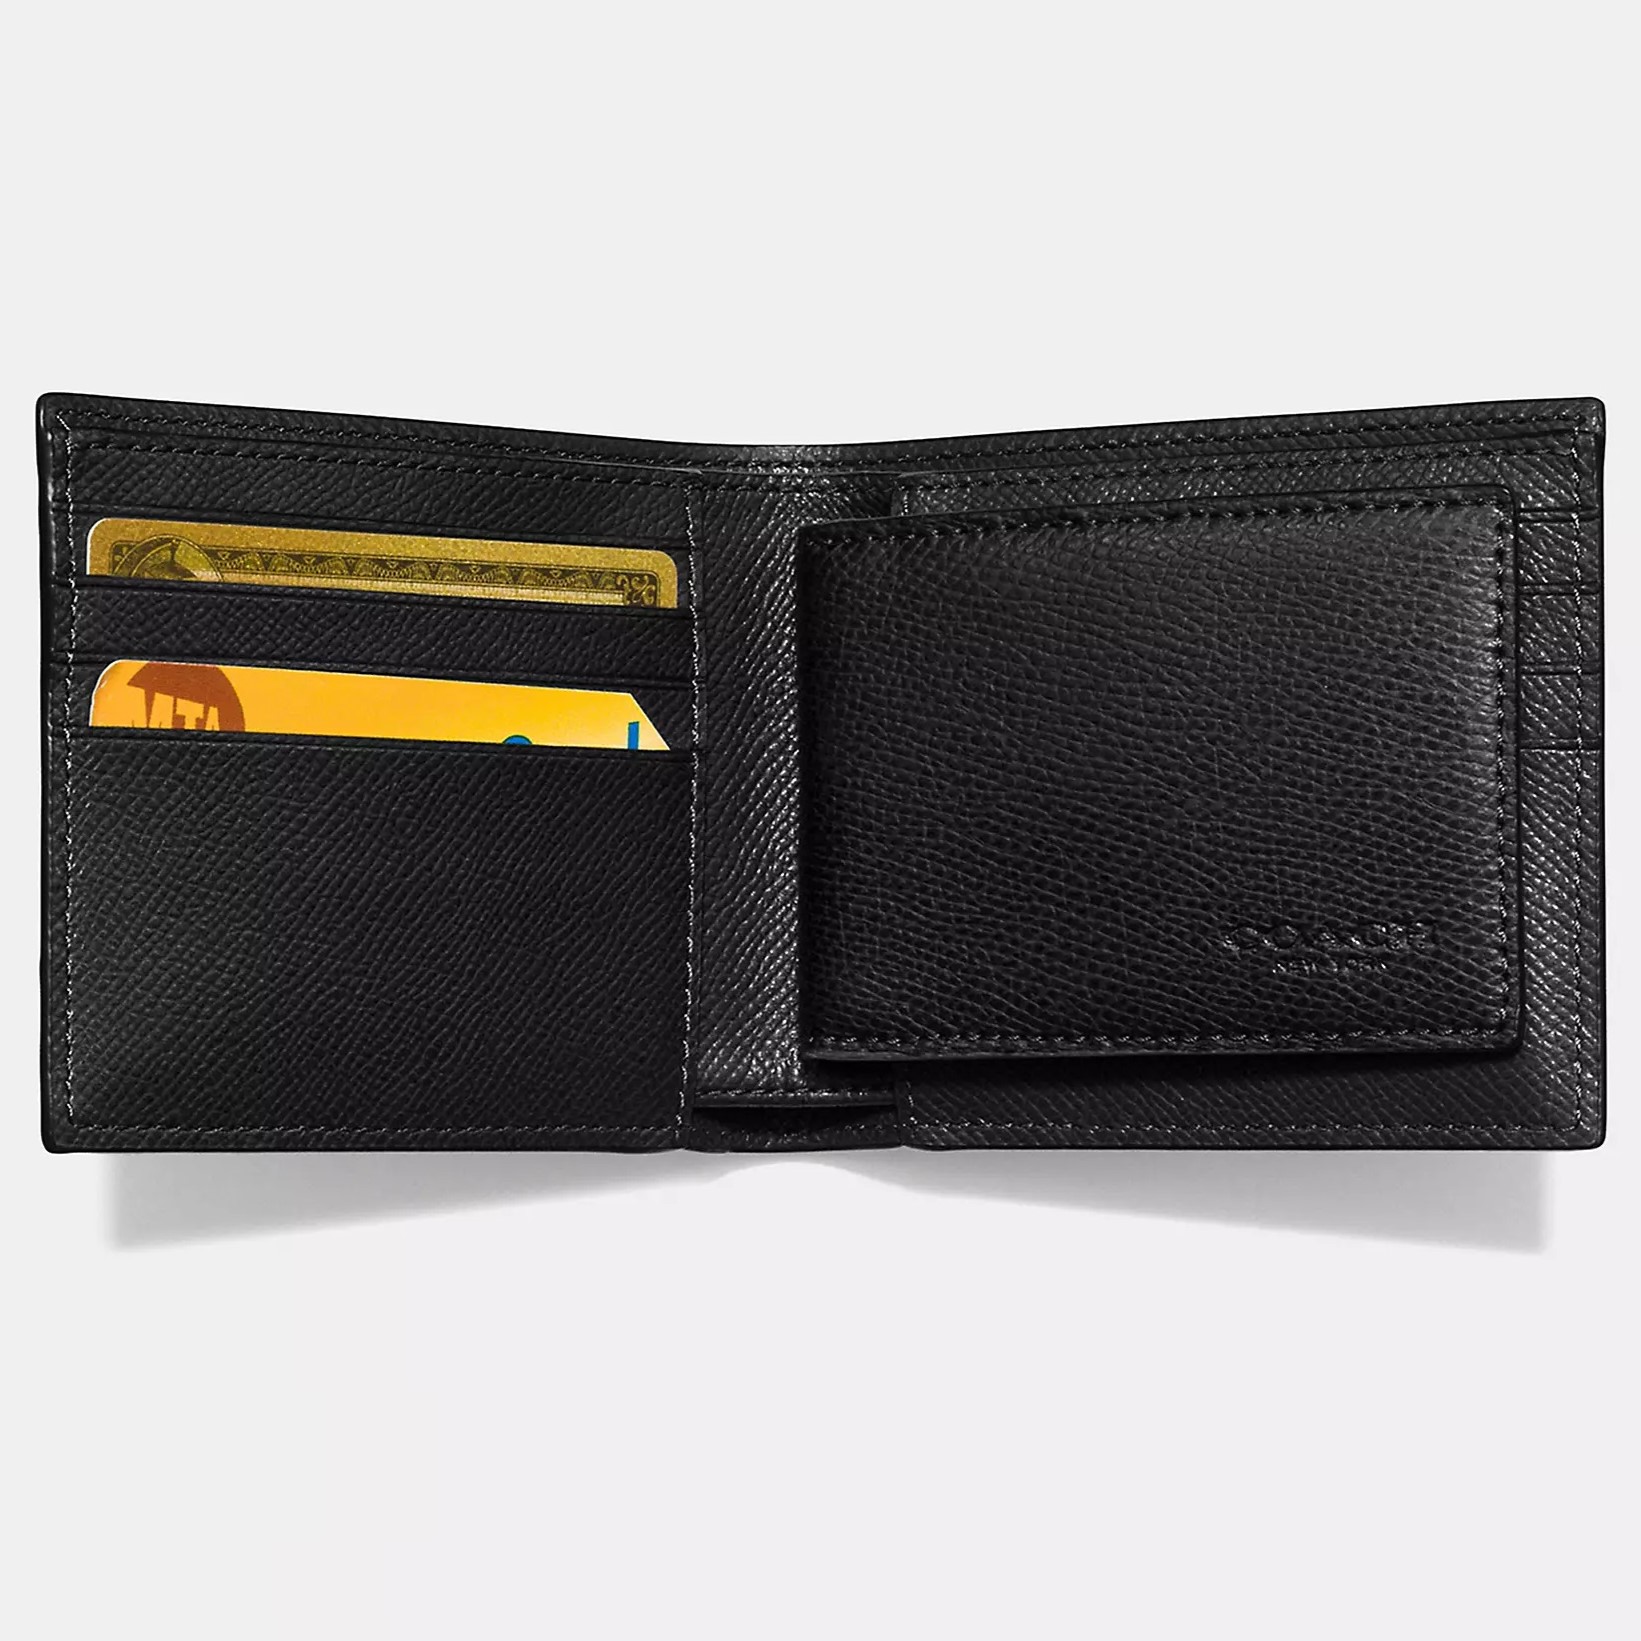 VÍ NGẮN NAM COACH BLACK COMPACT ID CROSSGRAIN LEATHER WALLET F59112 1